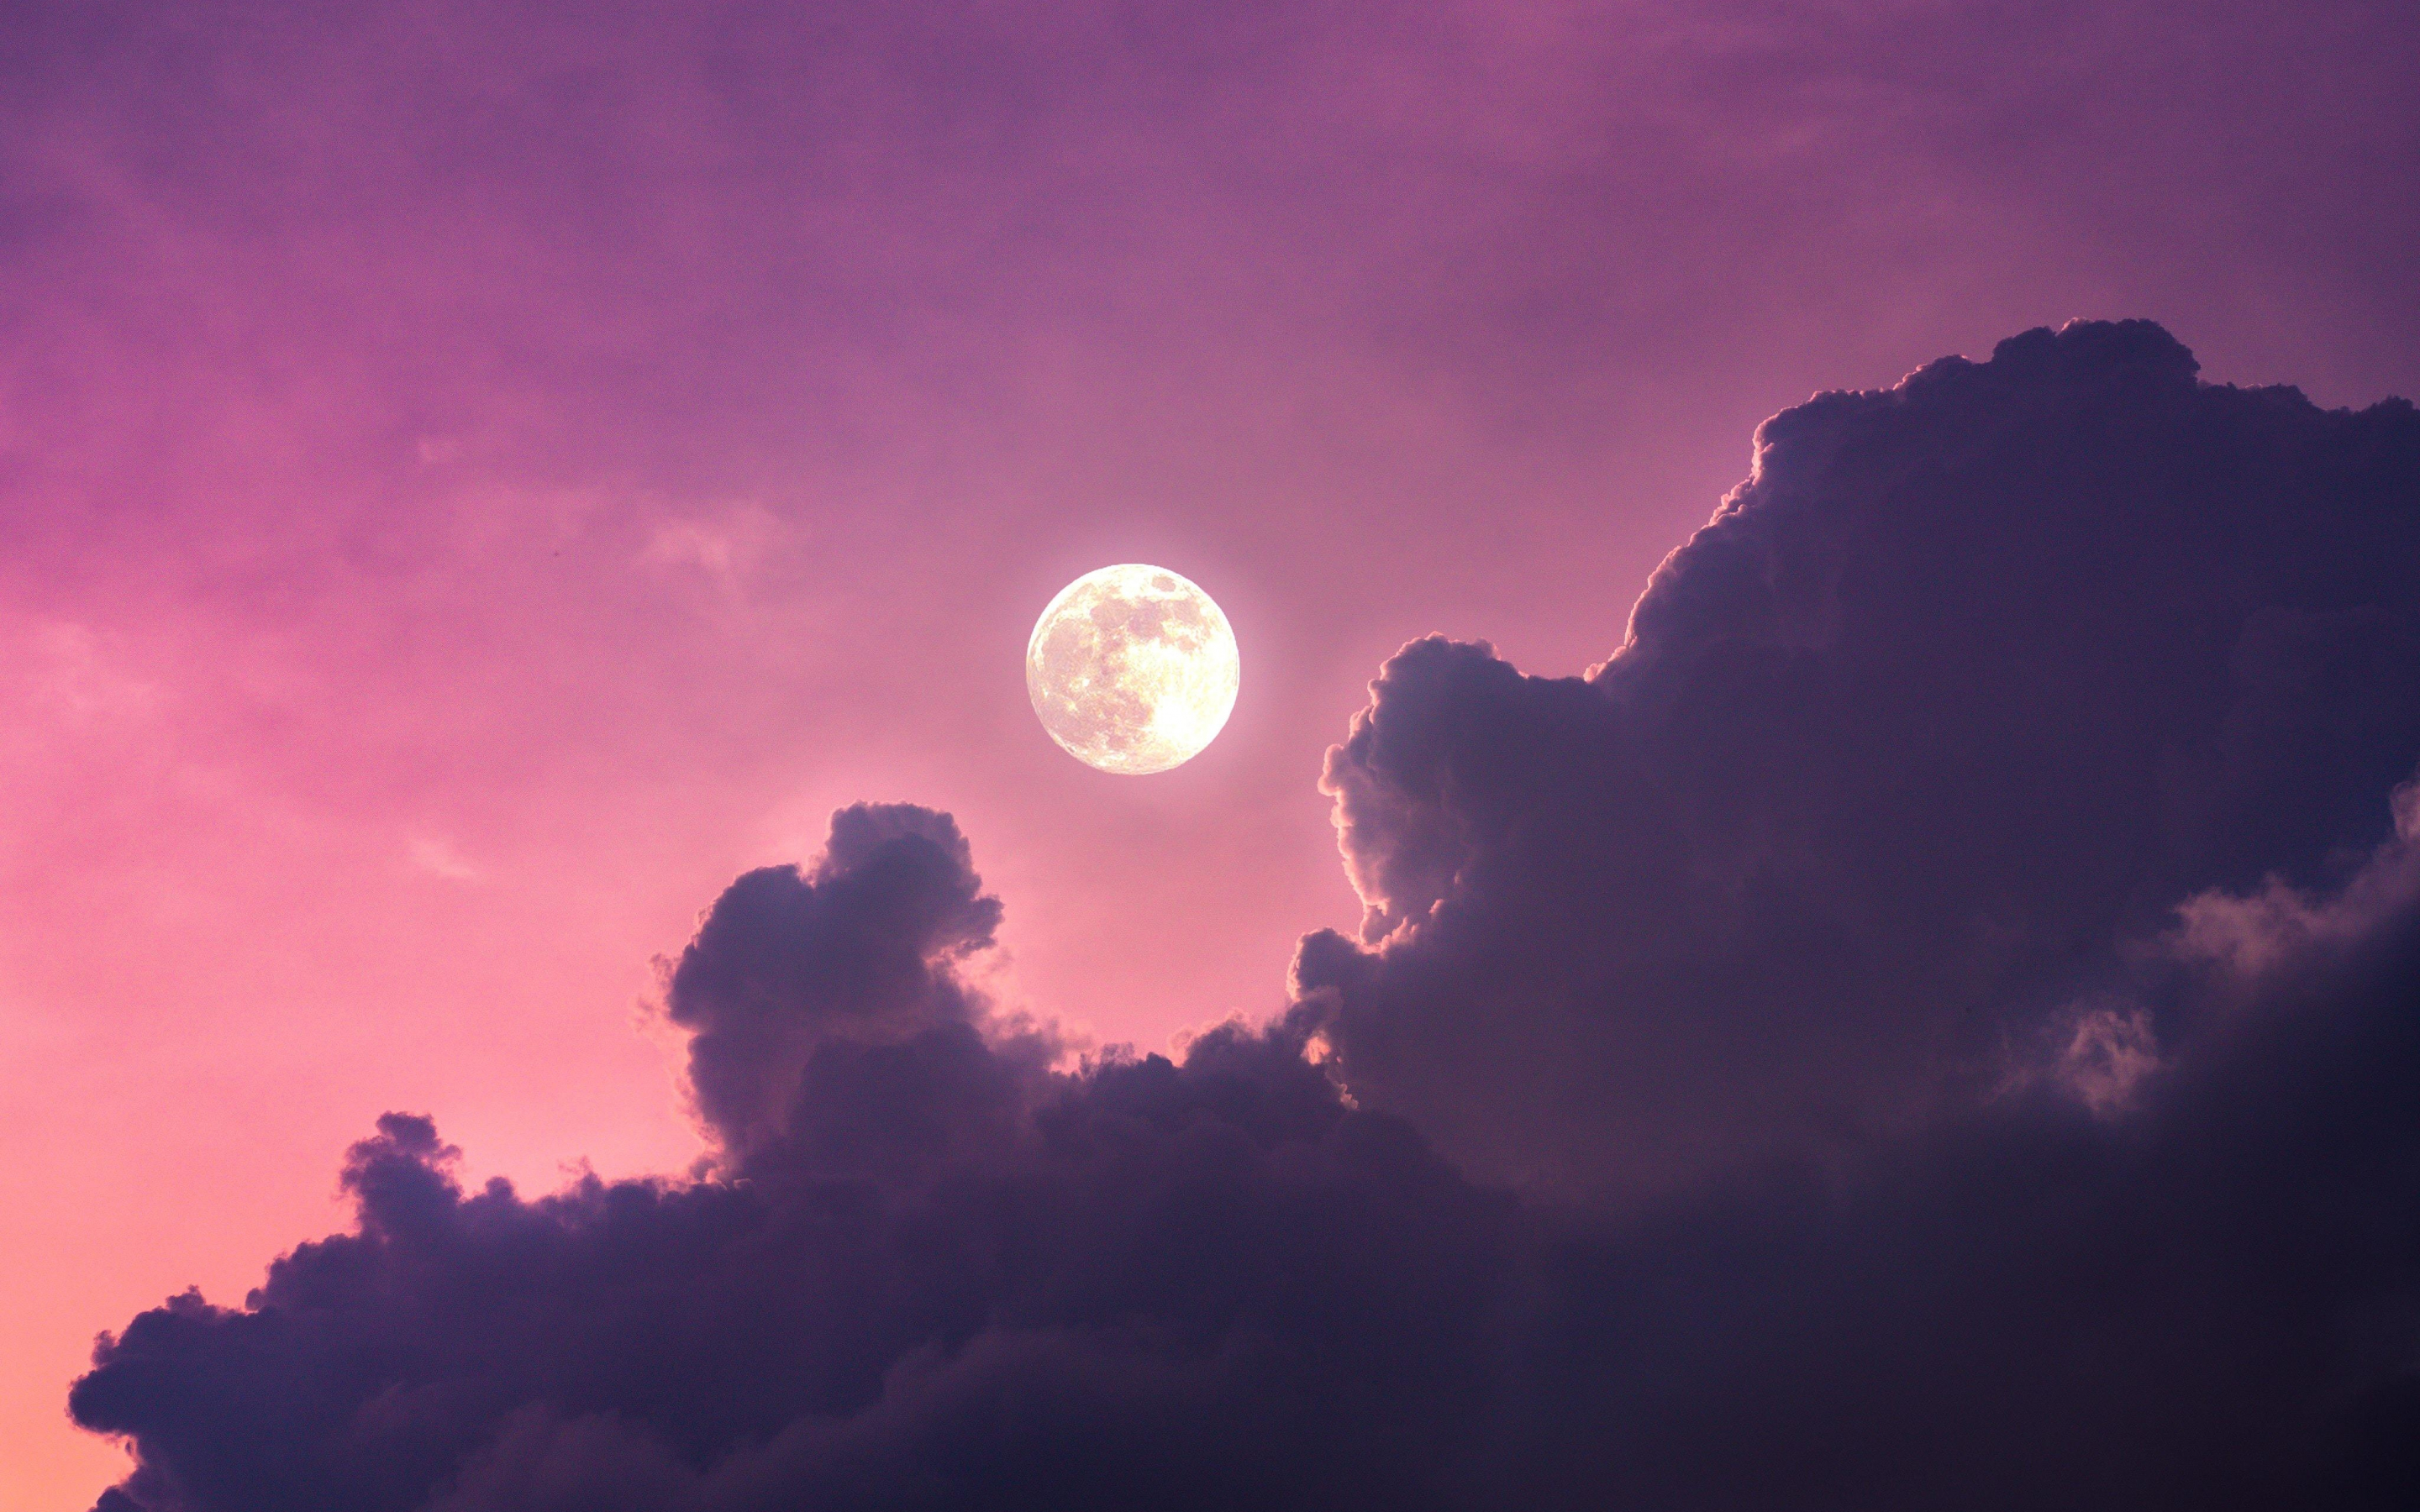 Clouds and moon light, sky, nature, 2880x1800 wallpaper